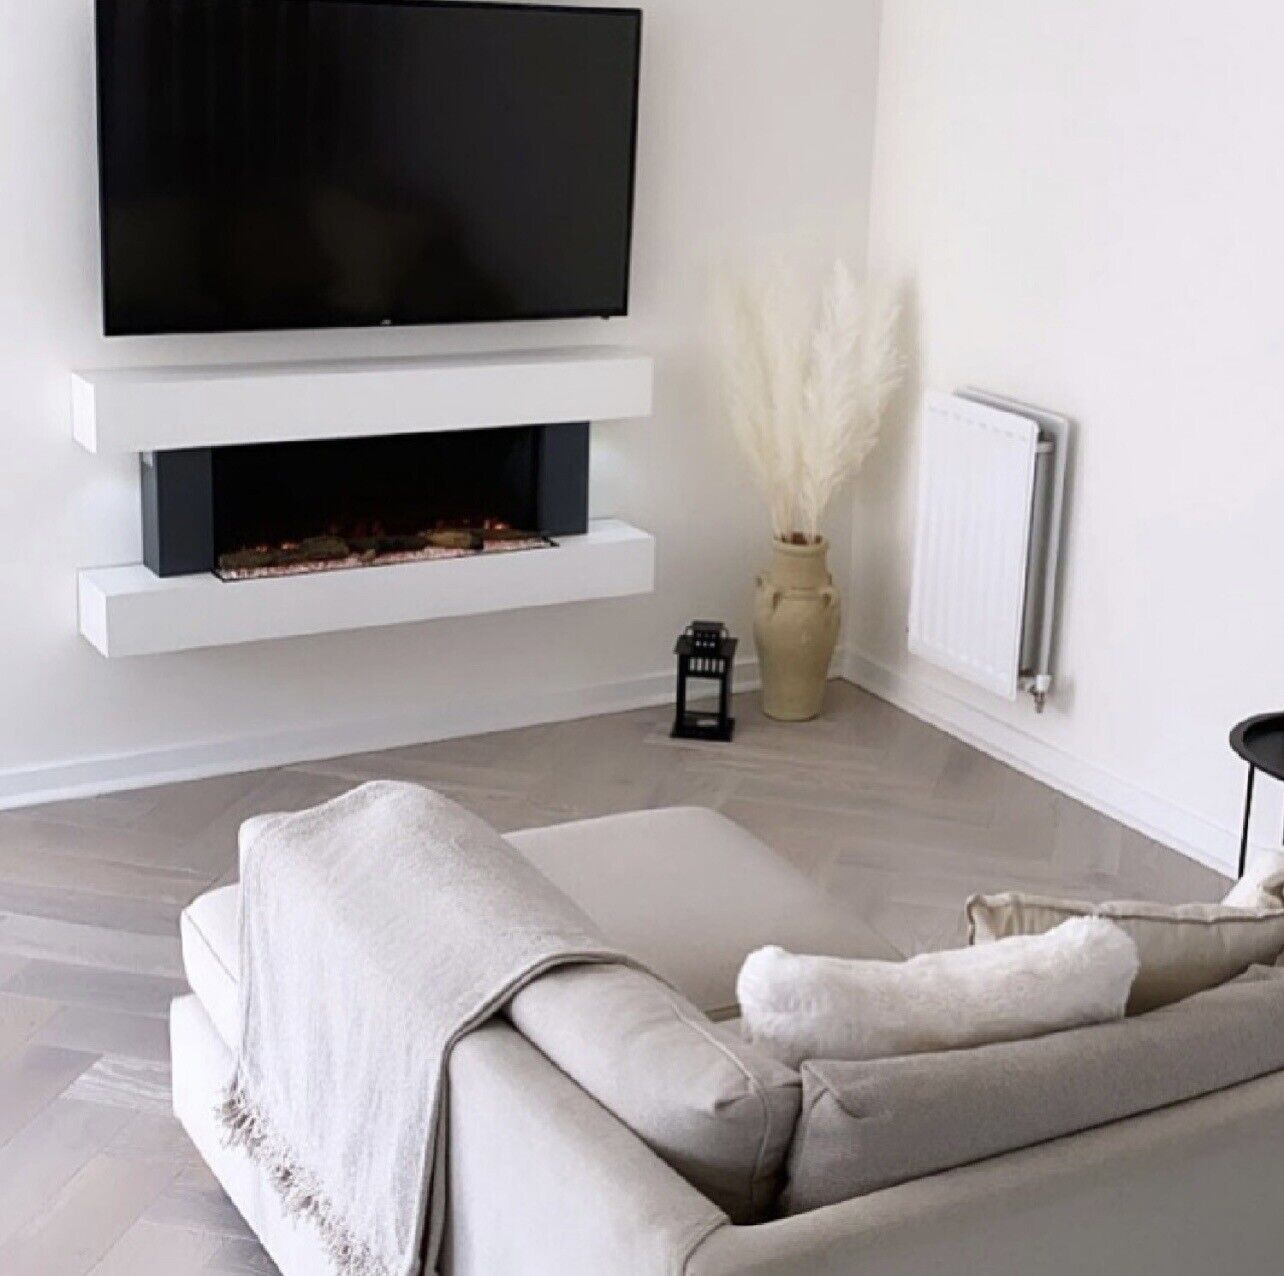 White Electric Fire with LED Flames and Remote Control